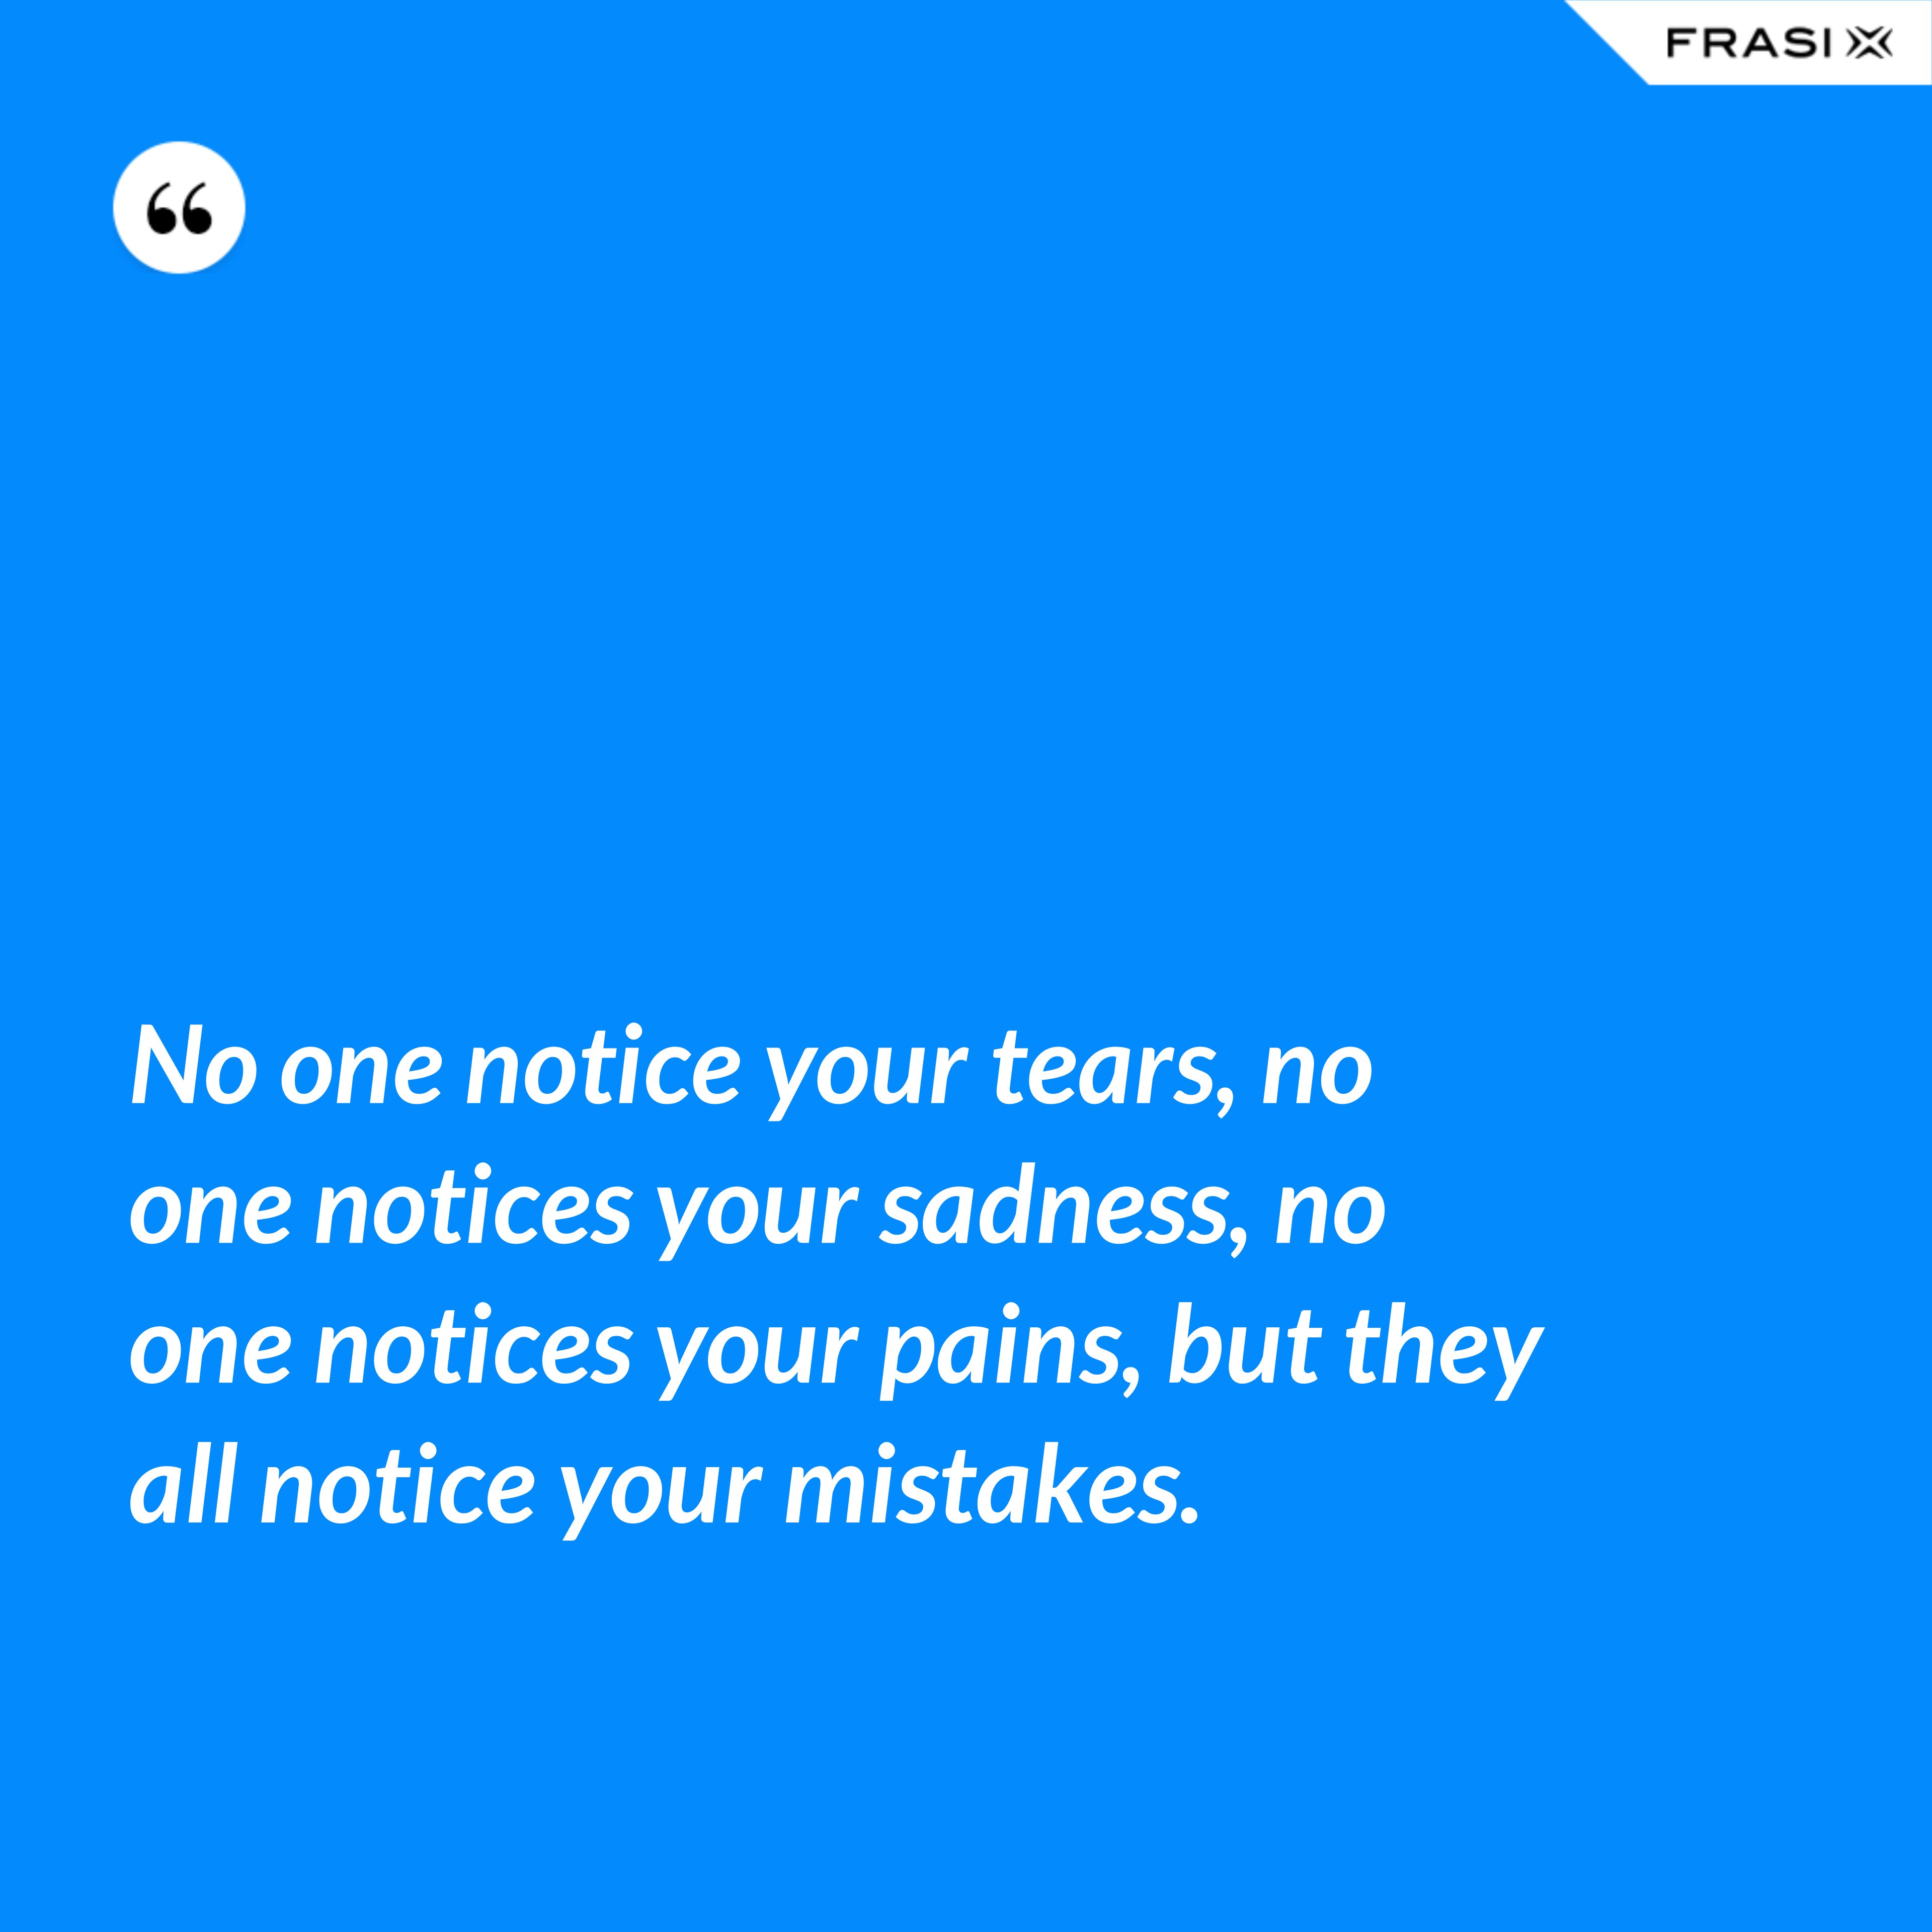 No one notice your tears, no one notices your sadness, no one notices your pains, but they all notice your mistakes. - Anonimo